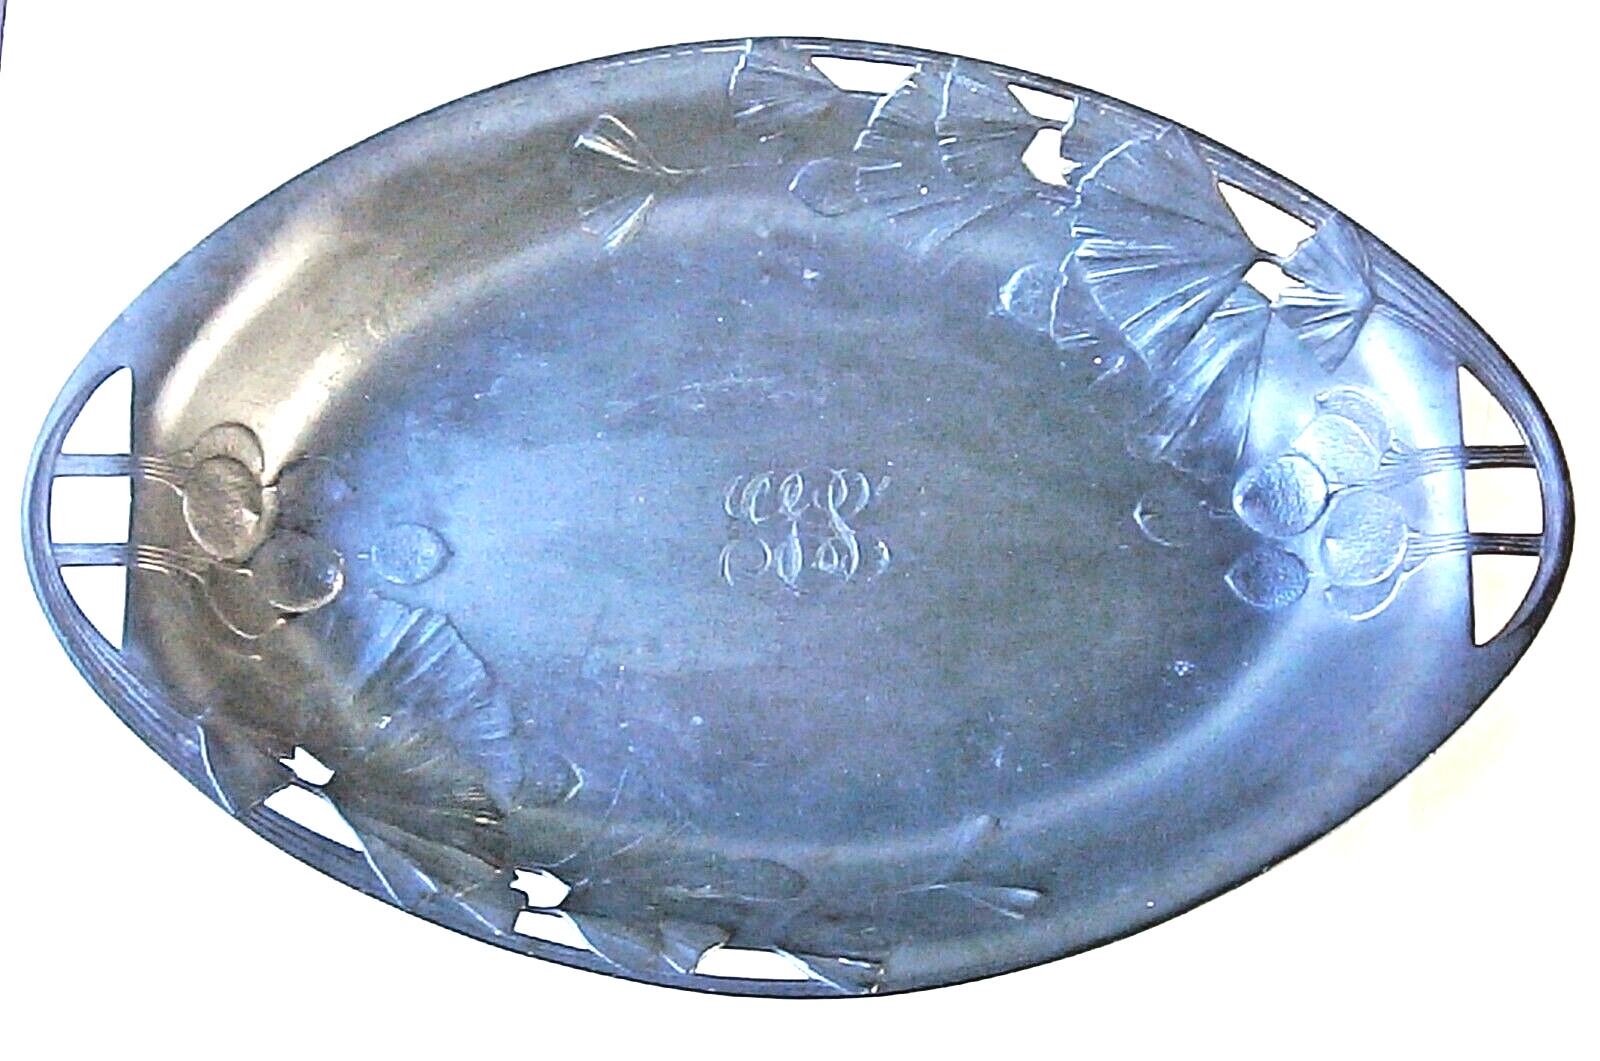 ORIVIT Art Nouveau Pewter Tray with Poppy Motif made in Germany c.1900